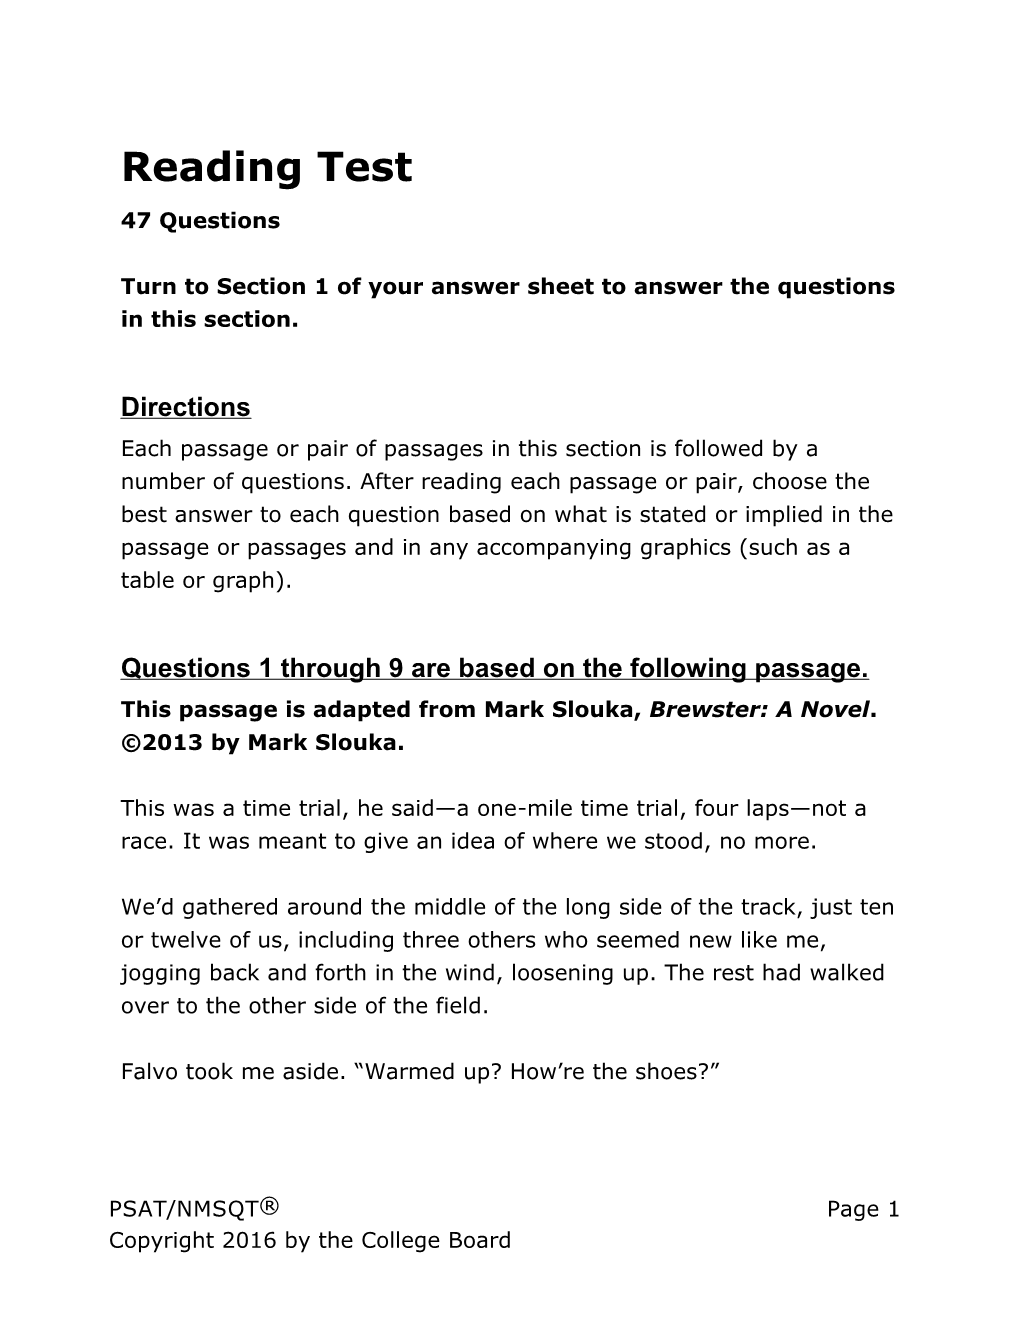 PSAT/NMSQT Practice Test 2 for Assistive Technology Reading Test SAT Suite of Assessments